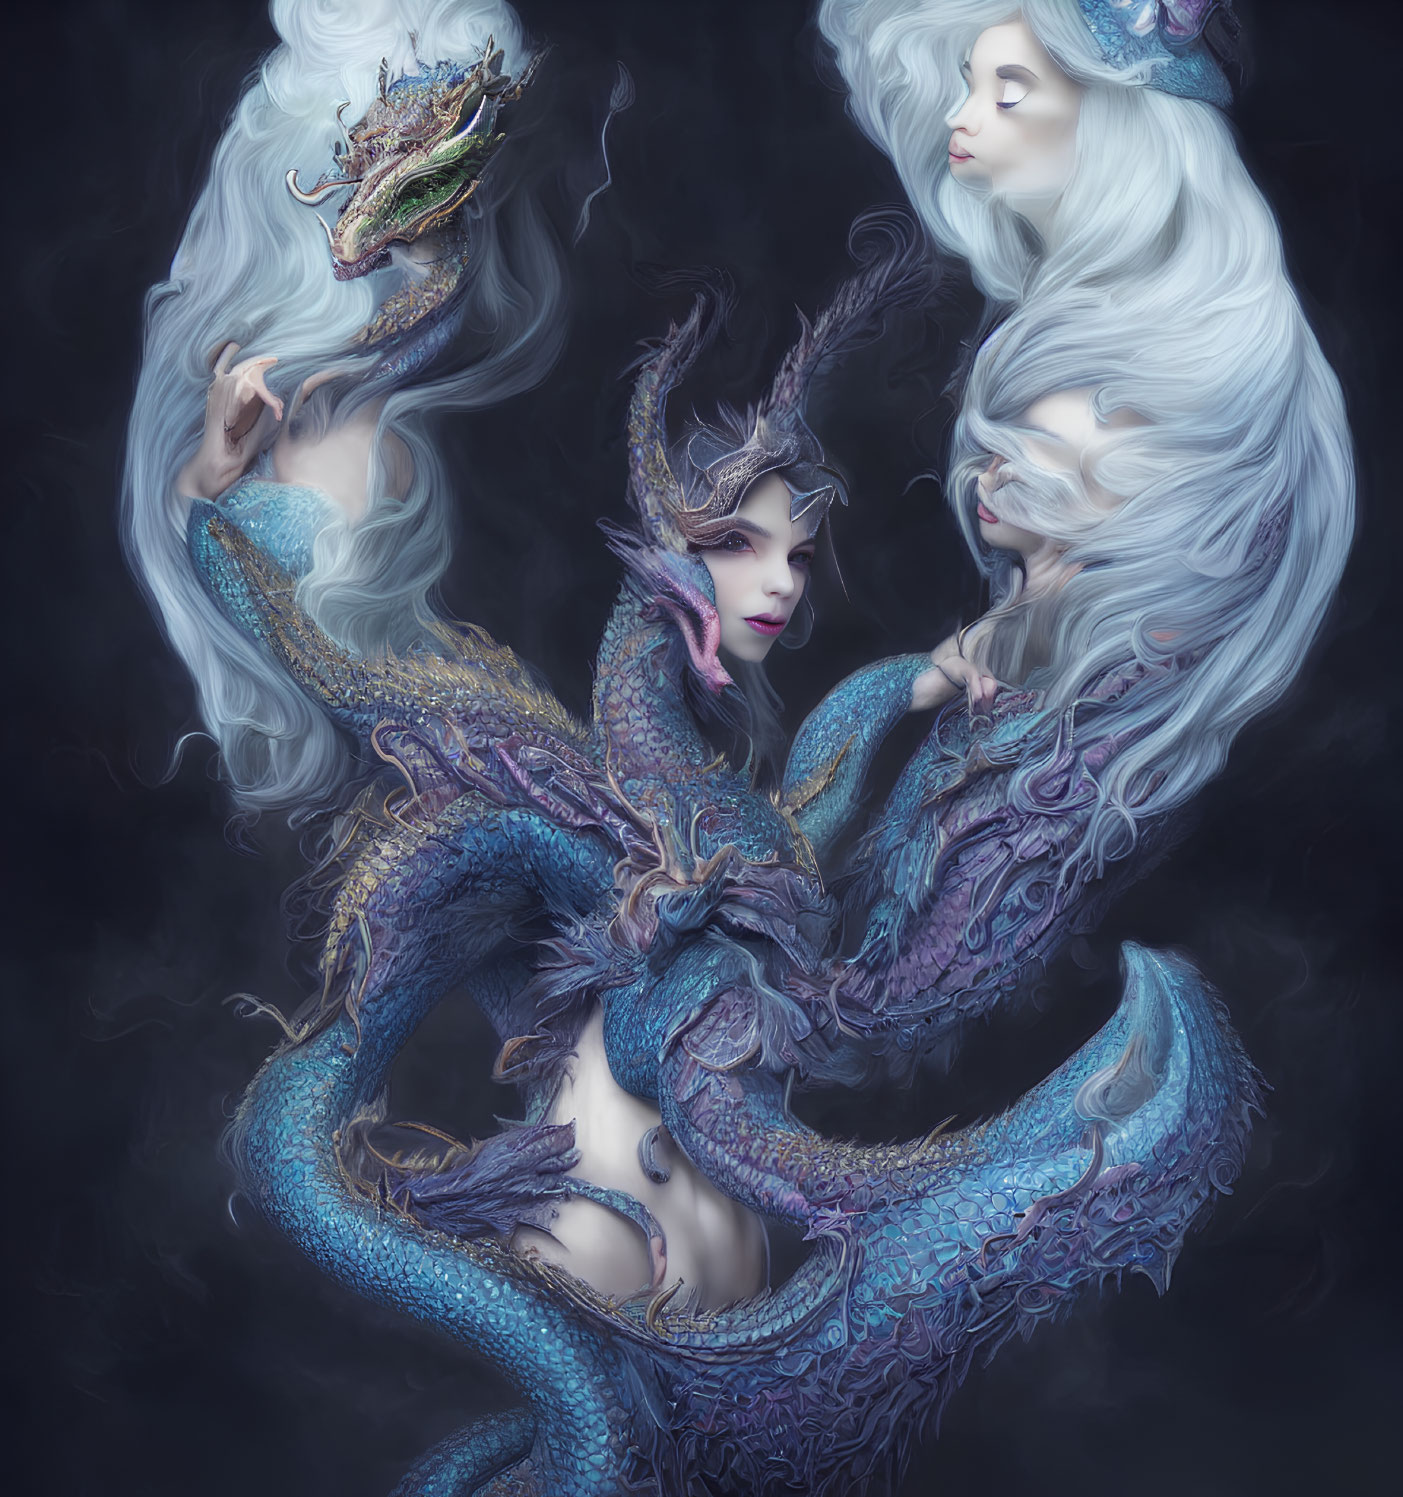 Fantasy mermaids with intricate design and dragon-like scales.